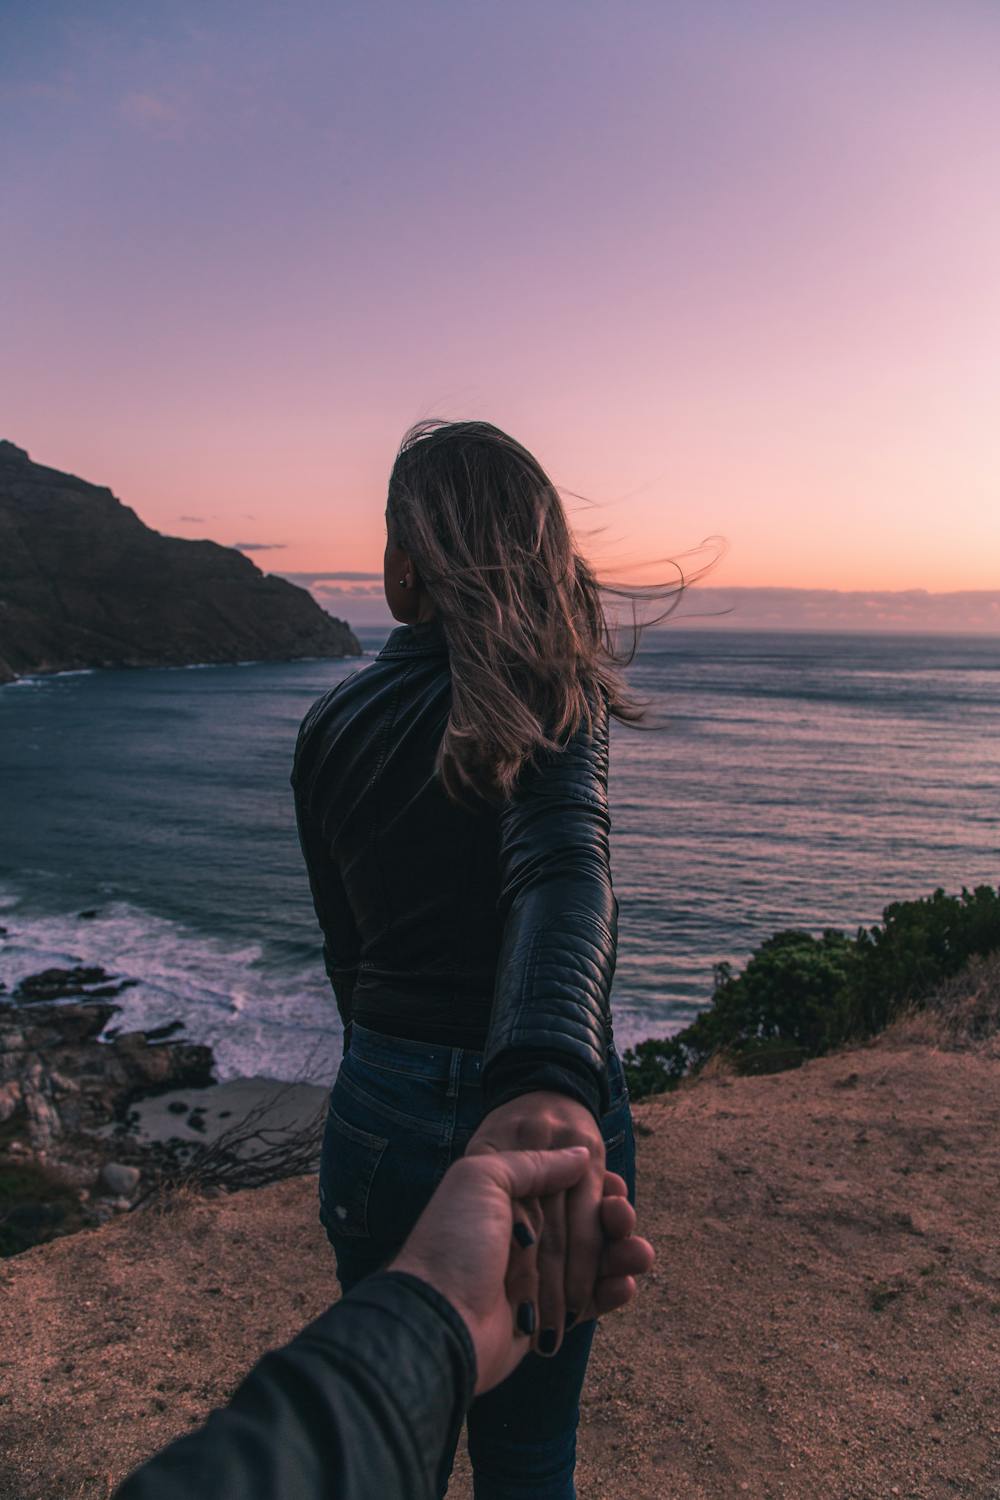 A couple holding hands. | Photo: Pexels